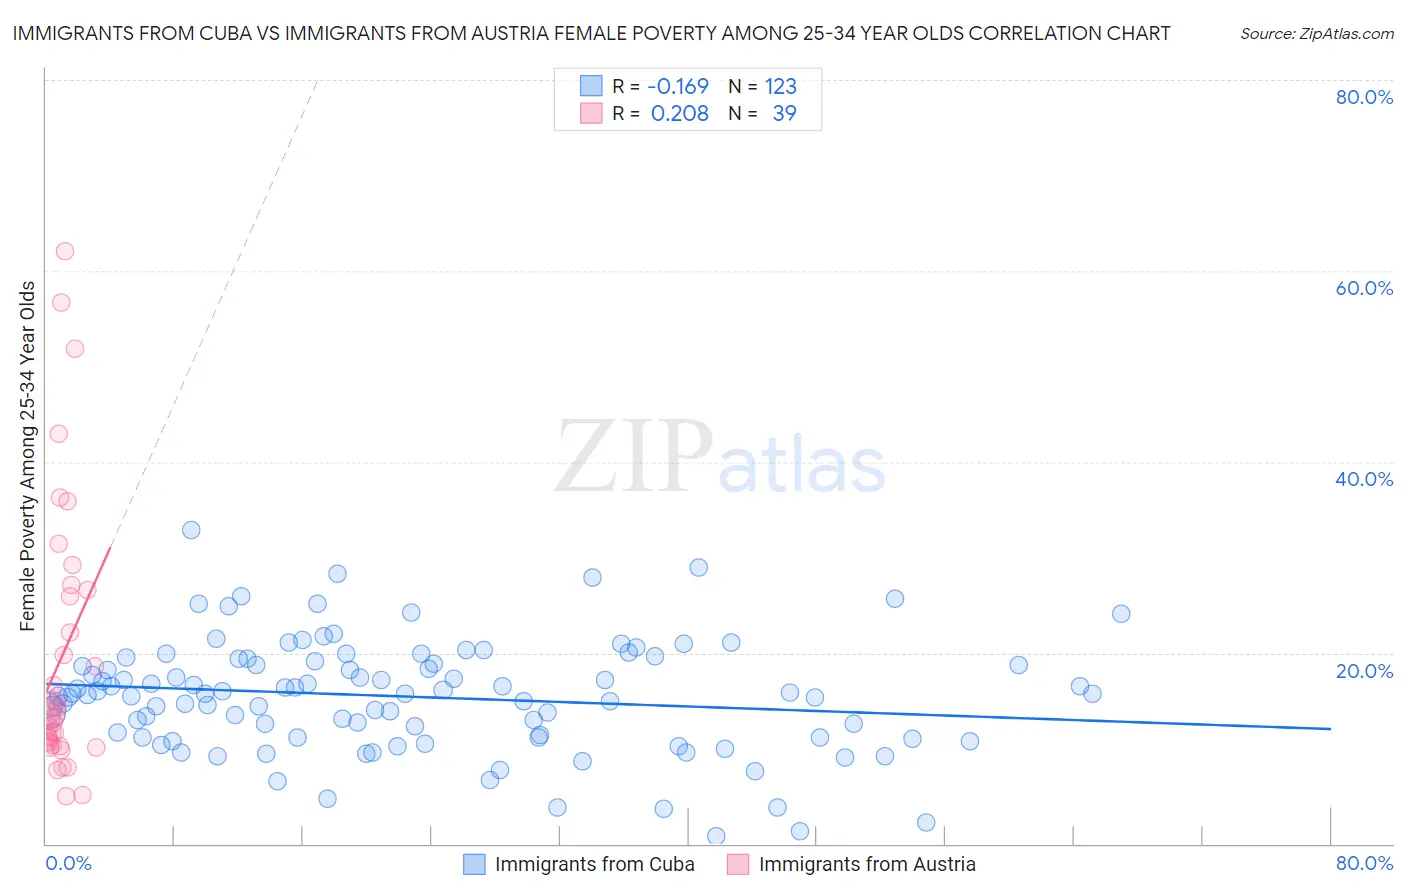 Immigrants from Cuba vs Immigrants from Austria Female Poverty Among 25-34 Year Olds